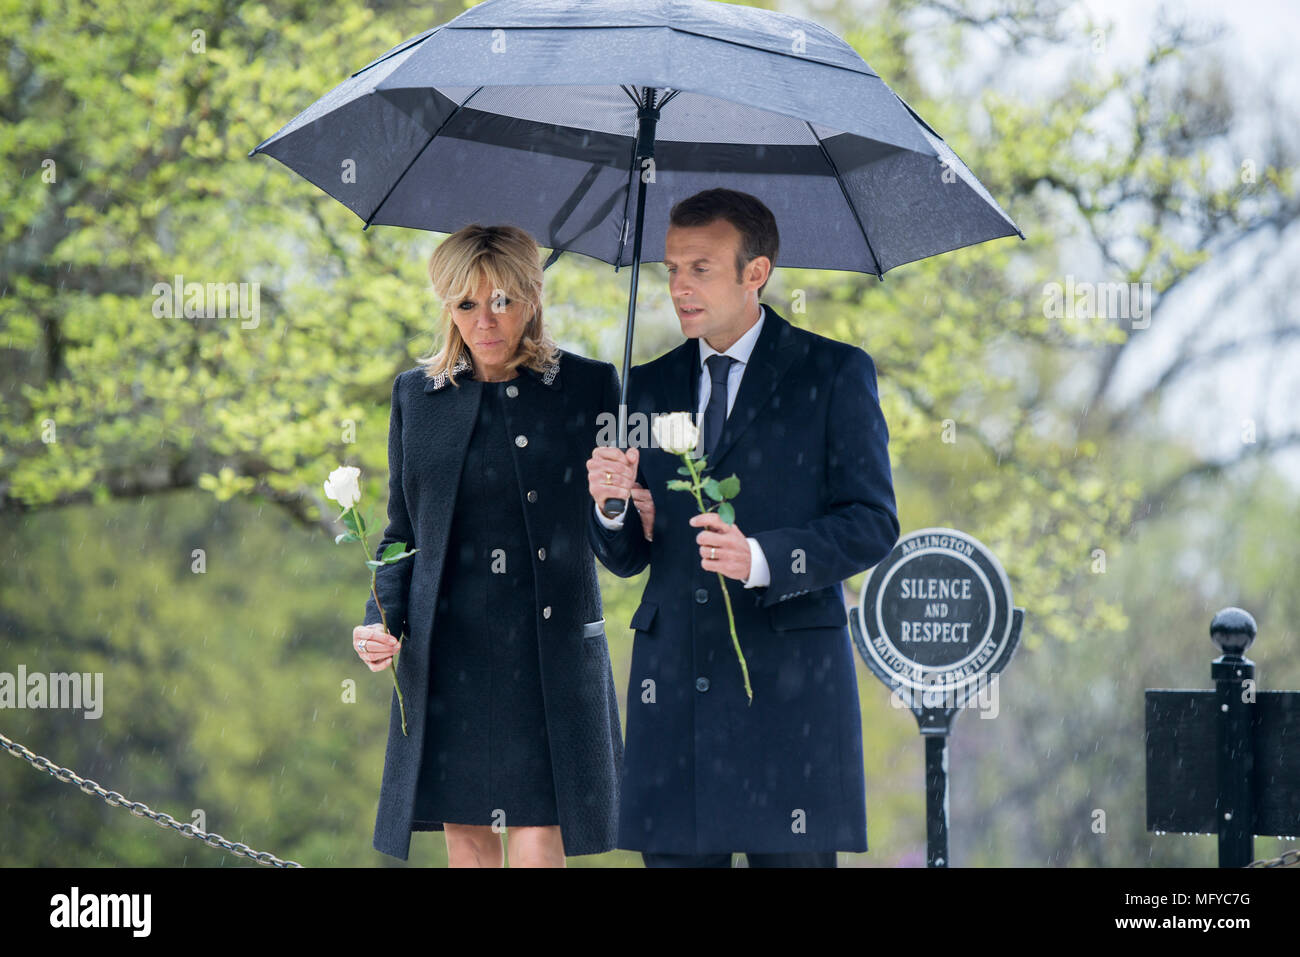 French President Emmanuel Macron, right, and his wife Brigitte Macron, place single white roses on the gravesite of former President John F. Kennedy and Jacqueline Bouvier Kennedy Onassis on a rainy day at Arlington National Cemetery April 24, 2018 in Arlington, Virginia. Stock Photo